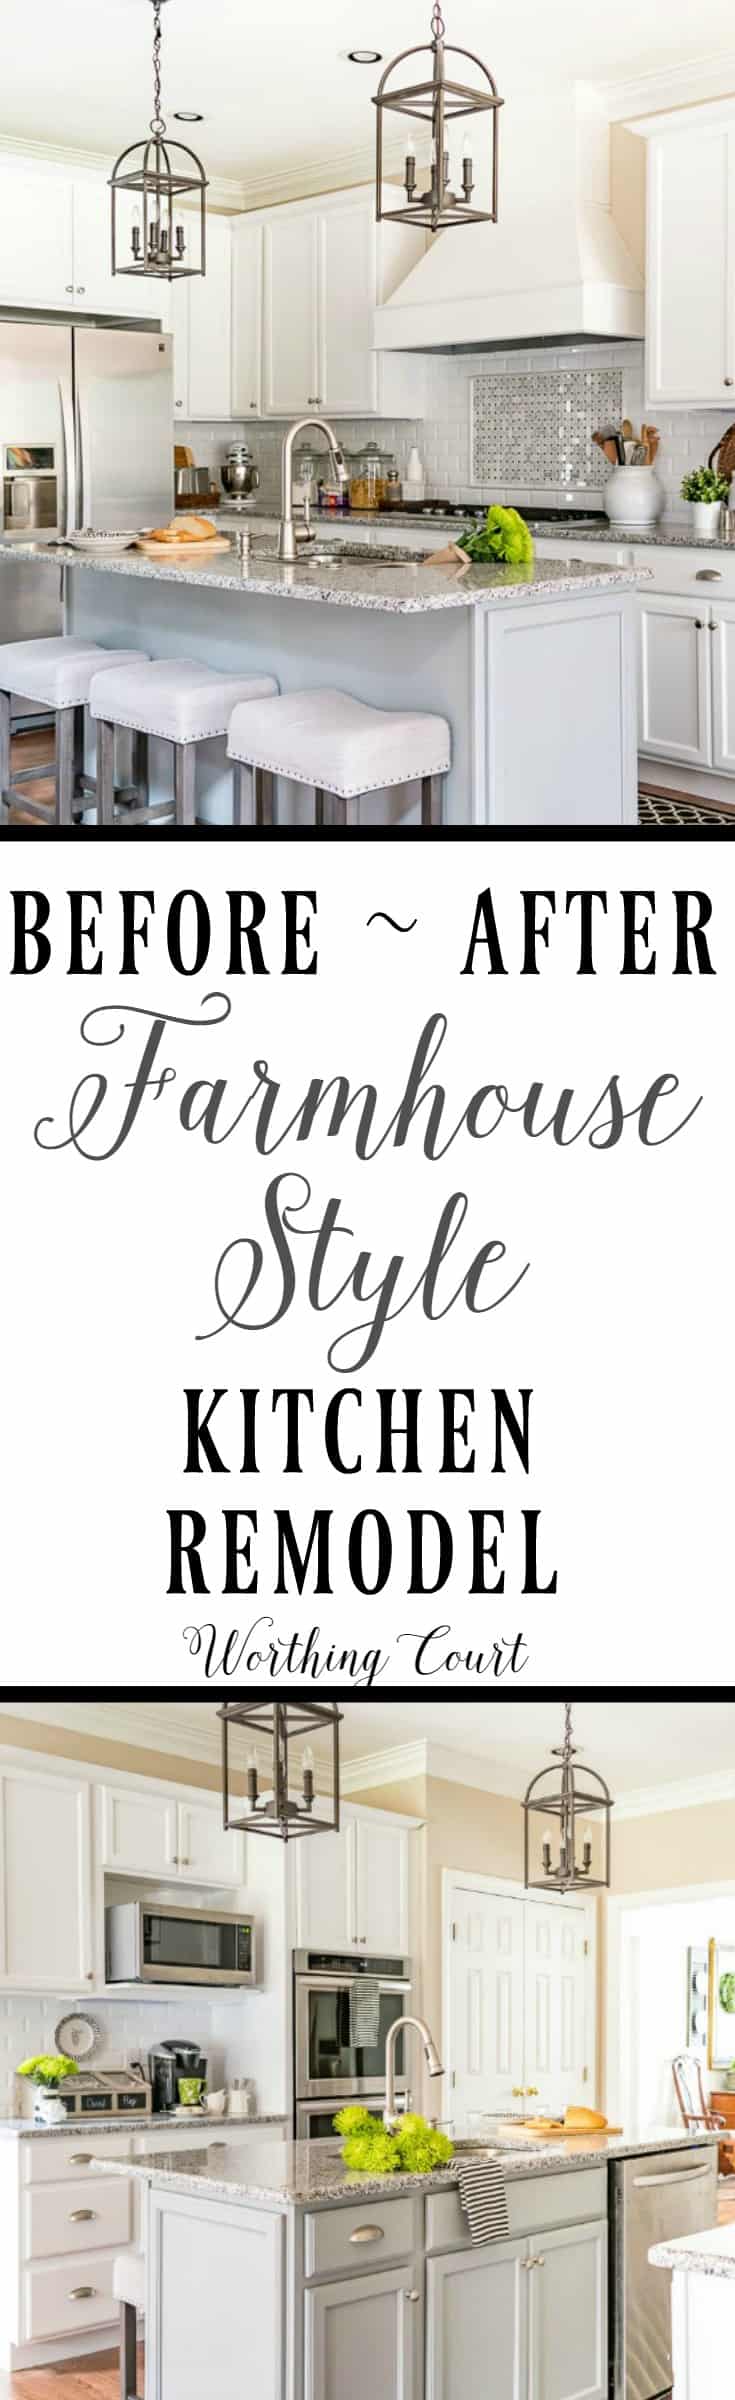 Before and After Farmhouse Style Kitchen Remodel || Worthing Court